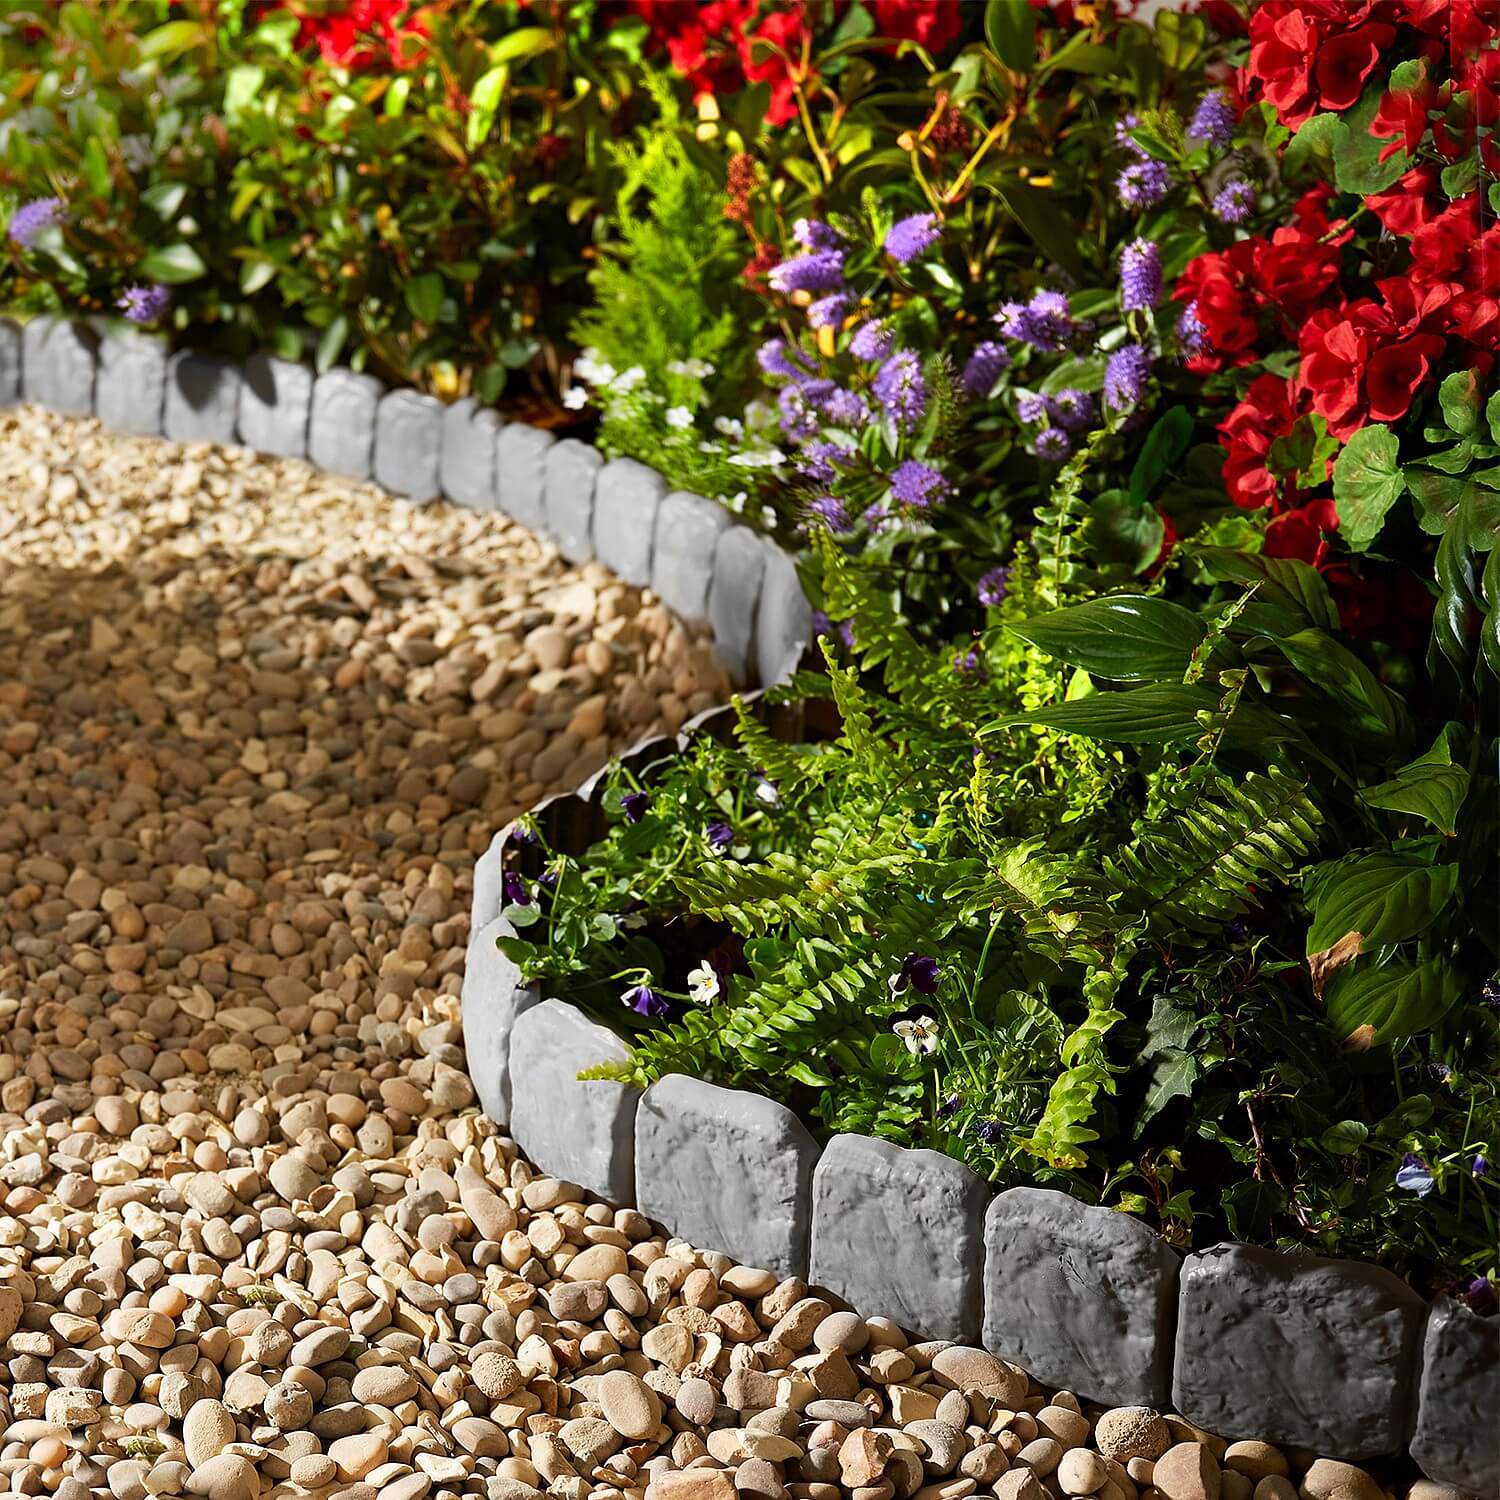 Cobbled Stone-Effect Lawn Edging - protects plants!